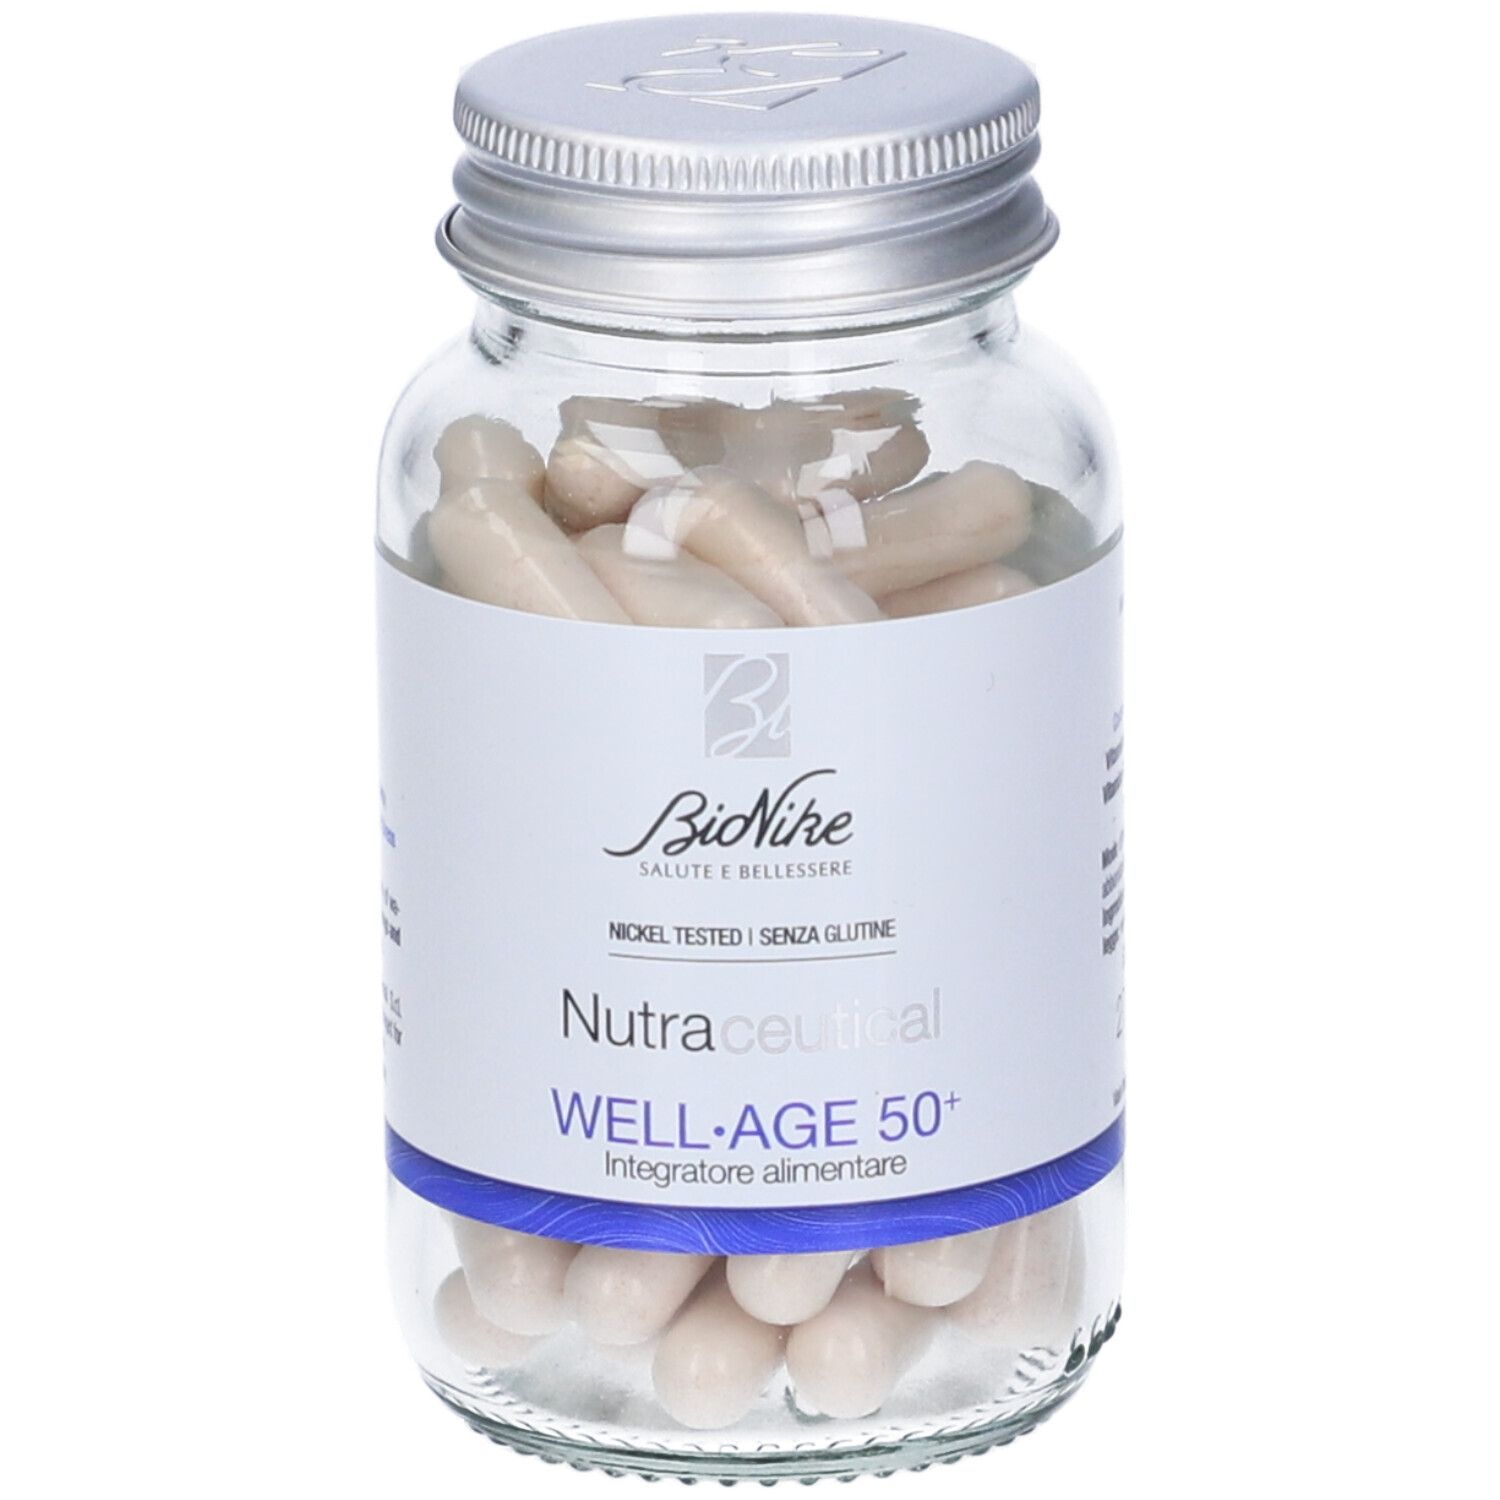 BioNike NUTRACEUTICAL Well-Age 50+